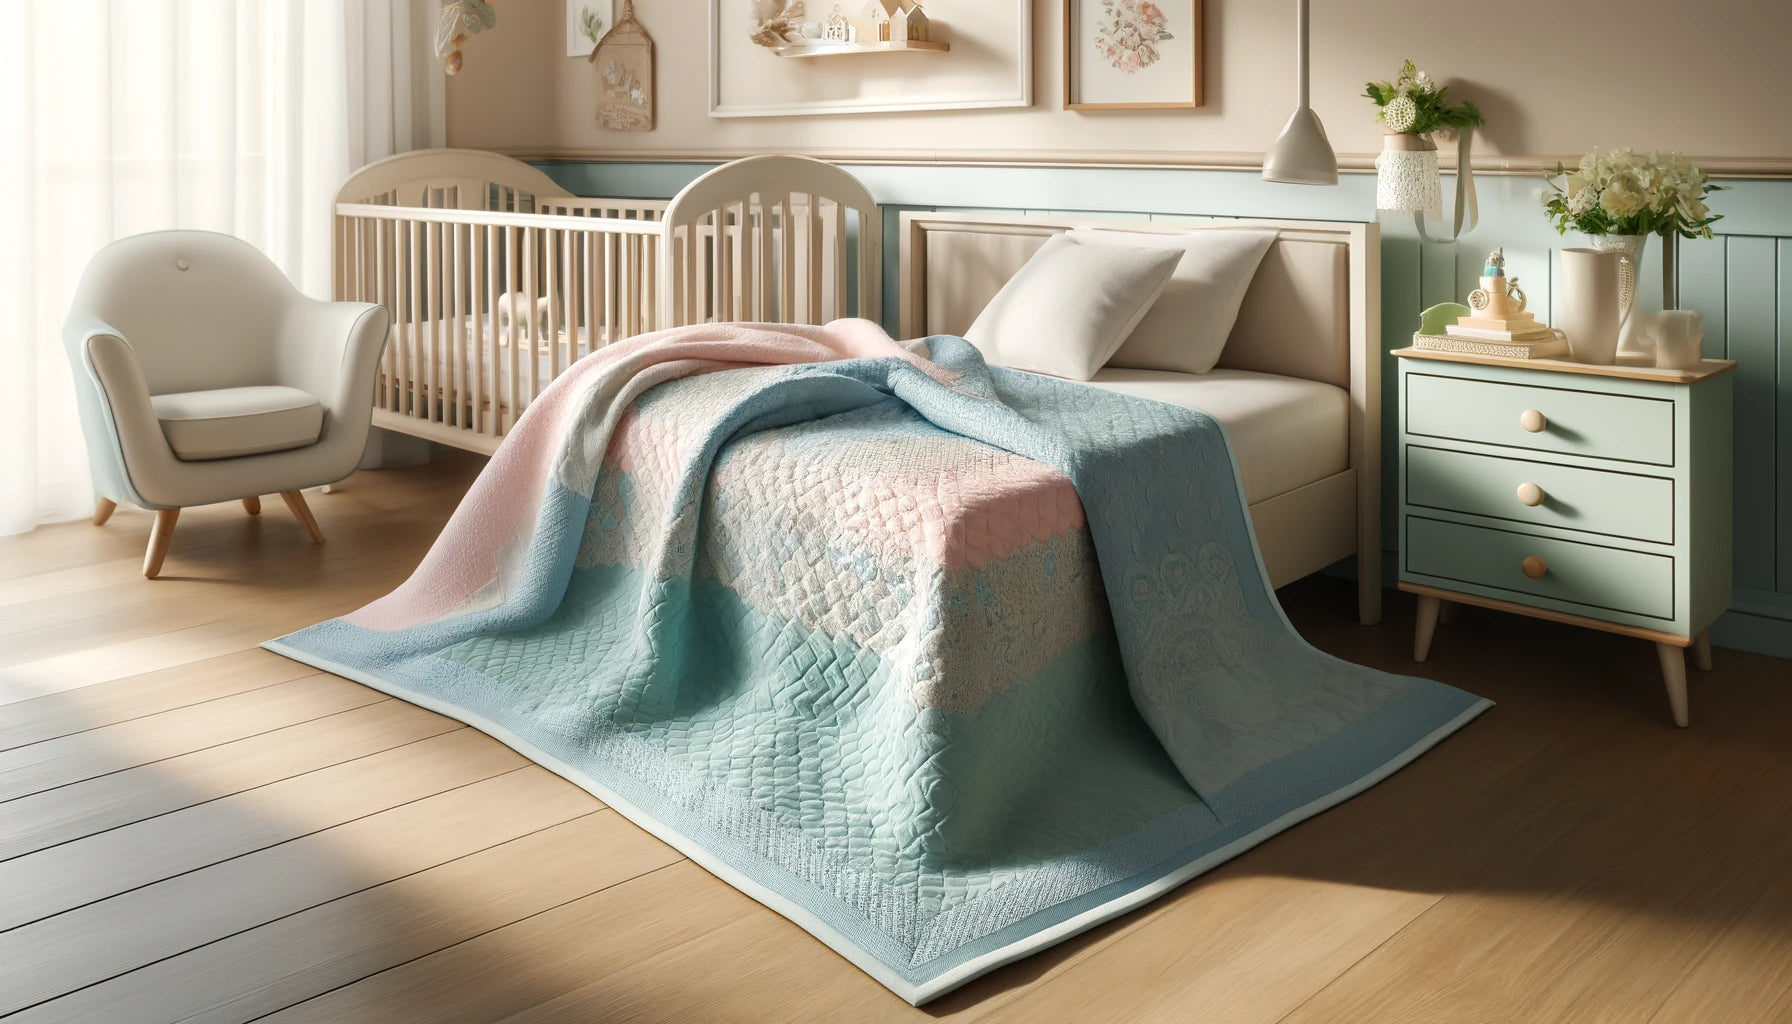 How to Make a Shell Stitch Baby Blanket: A Step-by-Step Guide